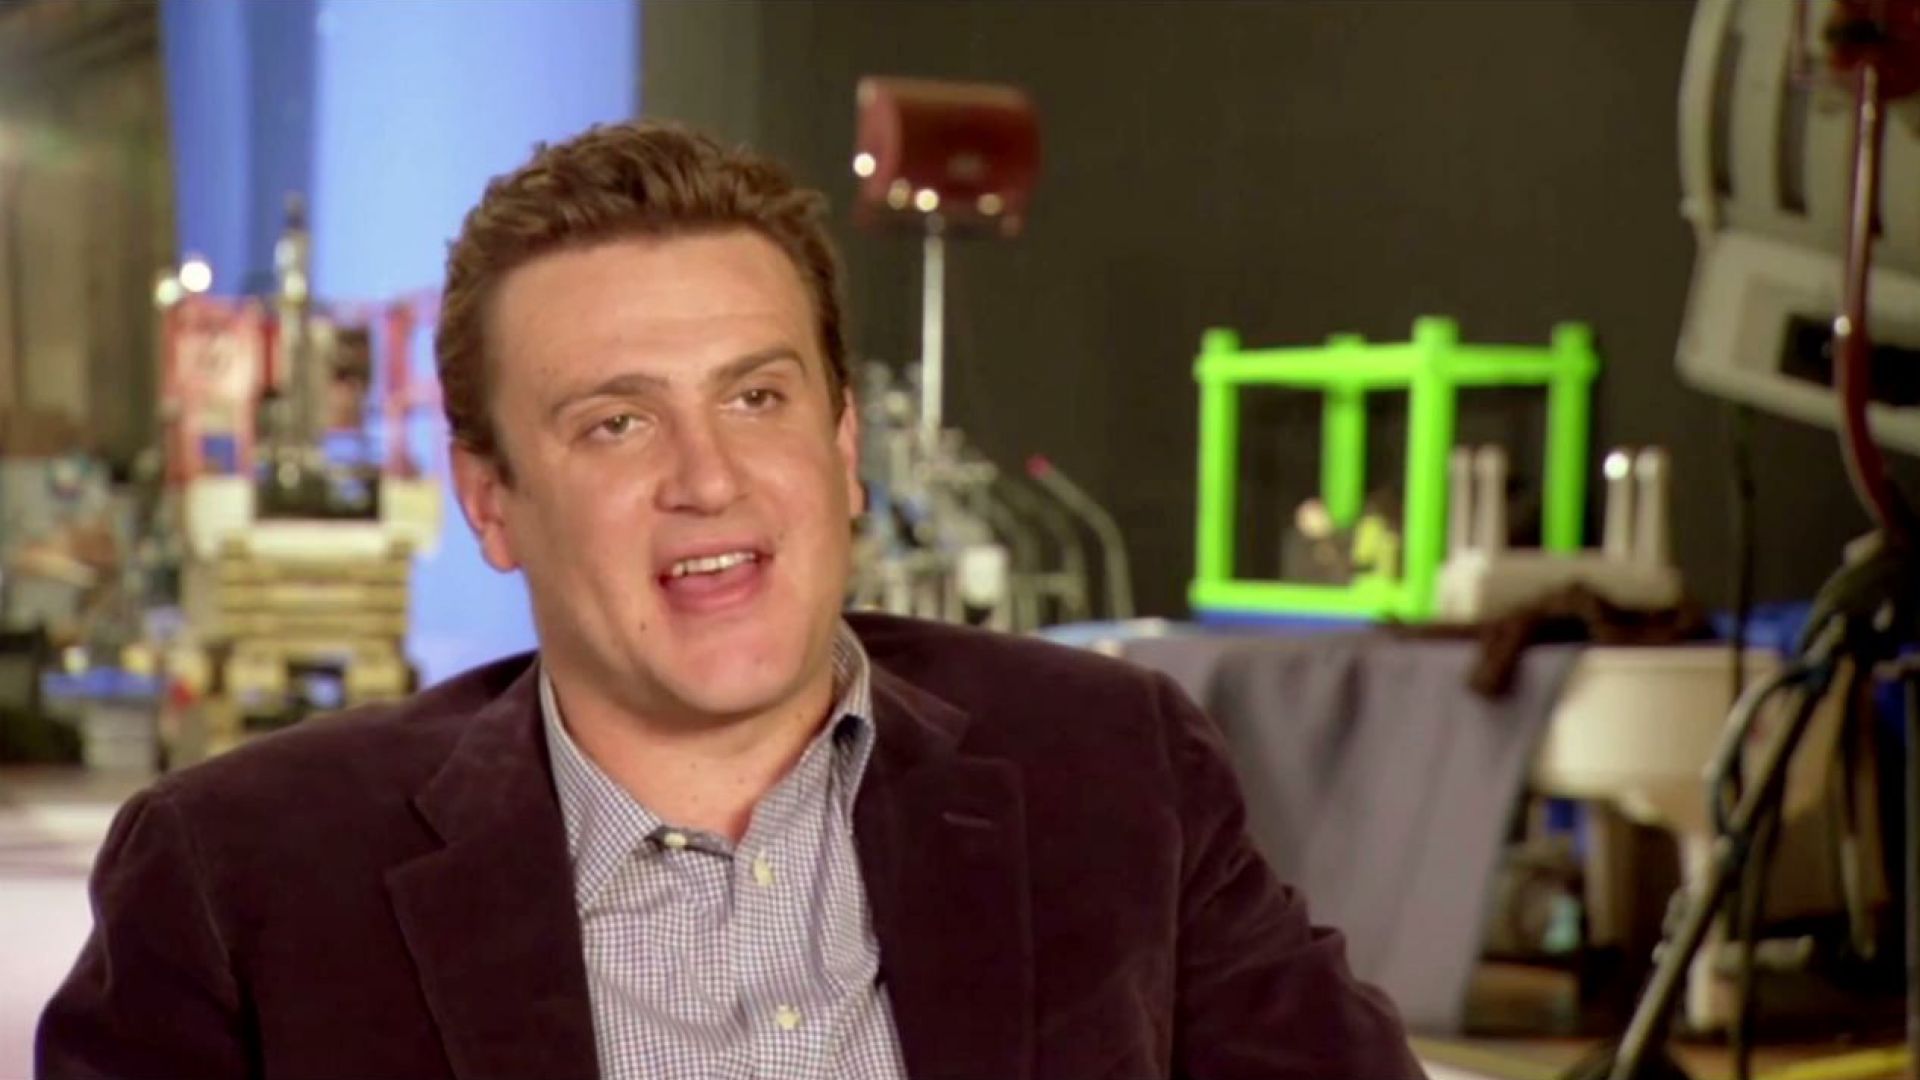 Jason Segel on The Muppets, Amy Adams and making his dream dream come true